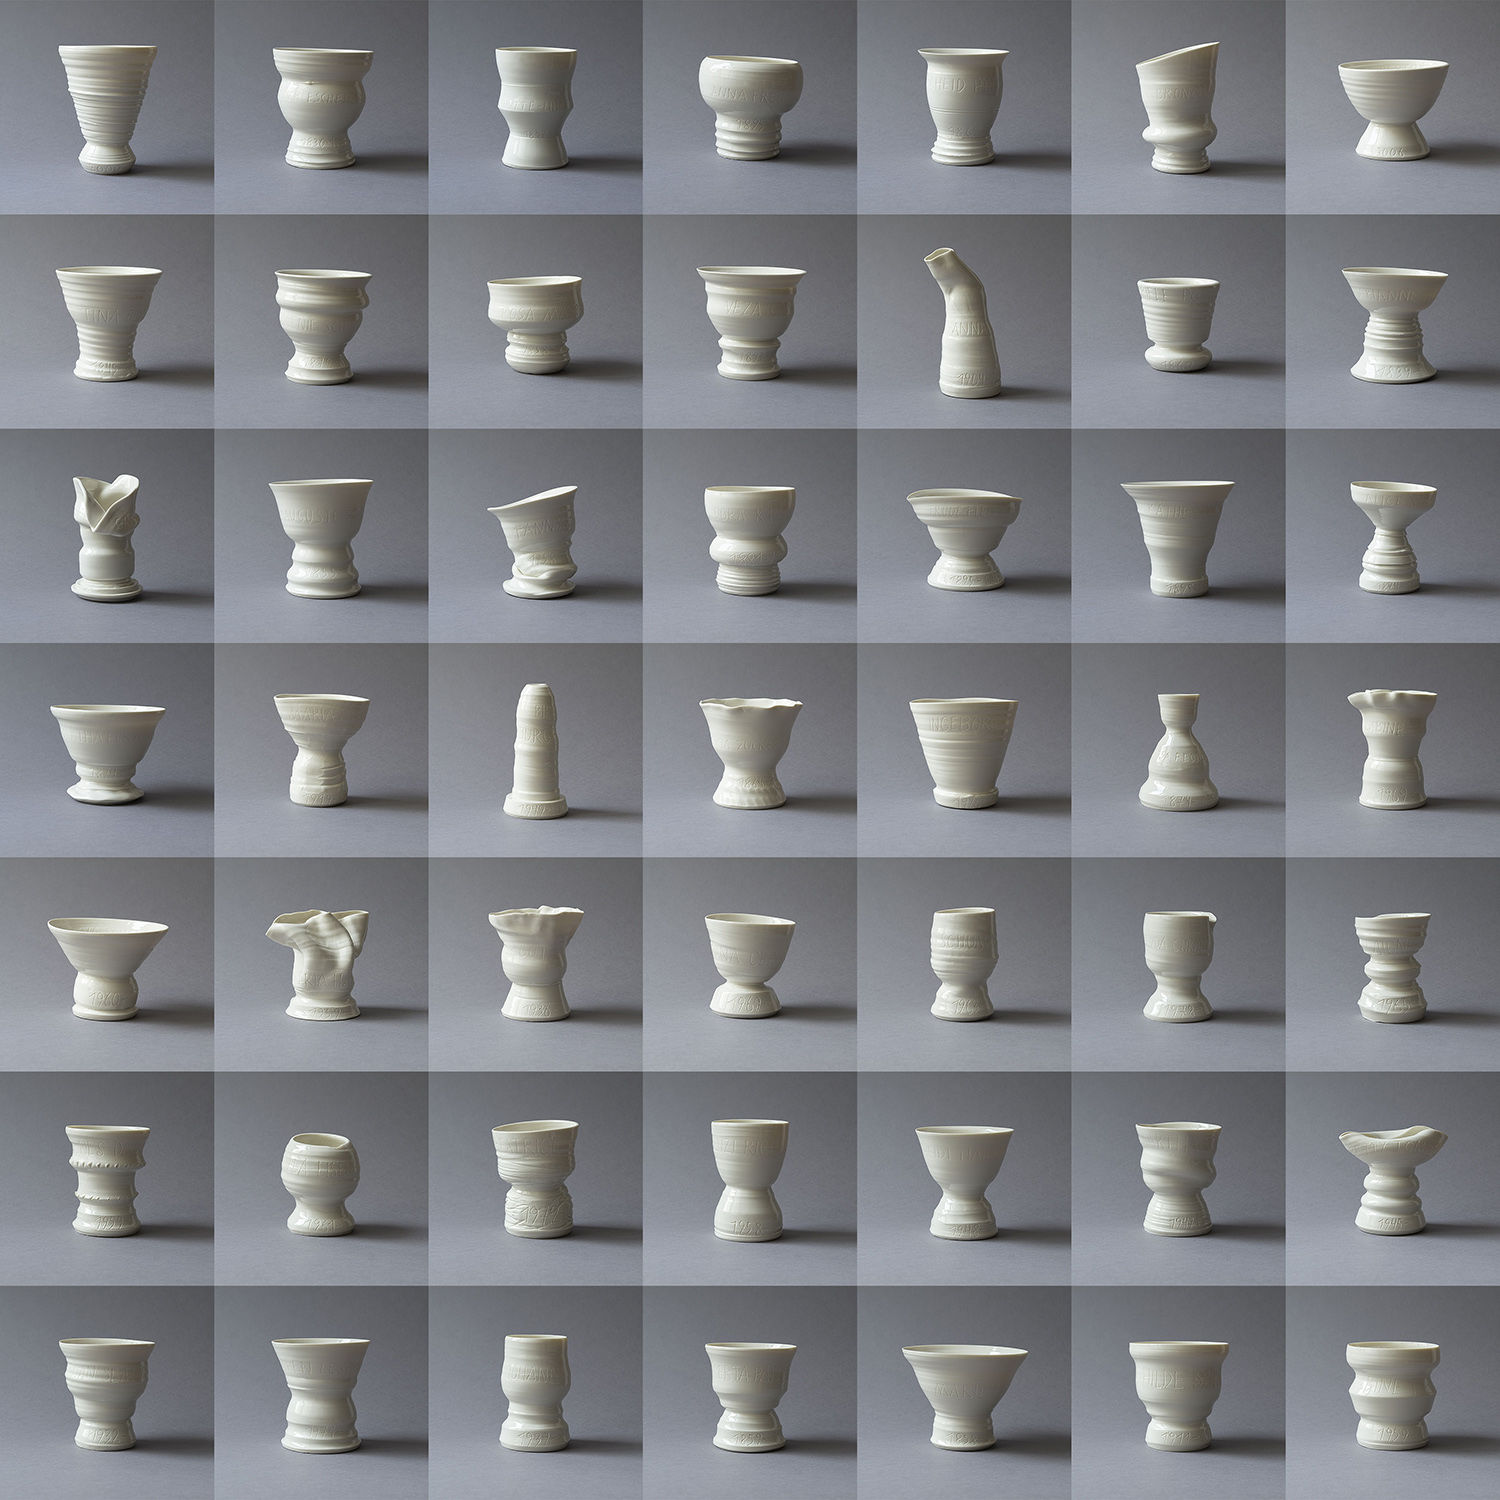 ONE MILLION - Women.Now Edition, 2018, 49 porcelain vessels with engraving, dimensions variable